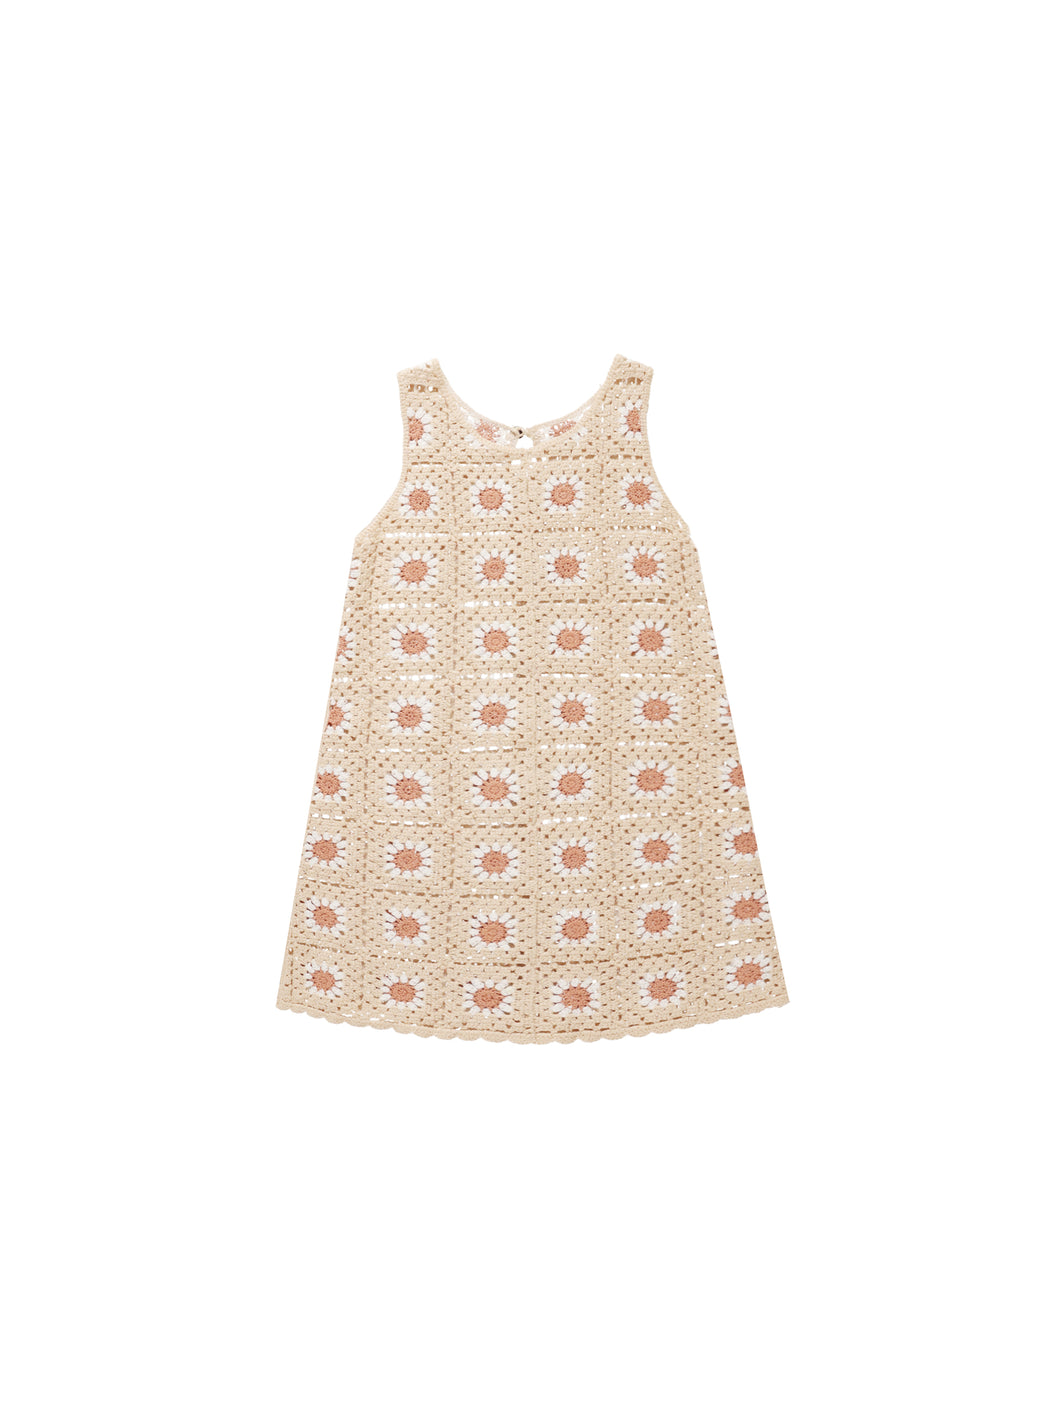 This sleeveless summer essential has an a-line silhouette, scalloped edging, and keyhold button opening on back.  Featuring a floral crochet pattern